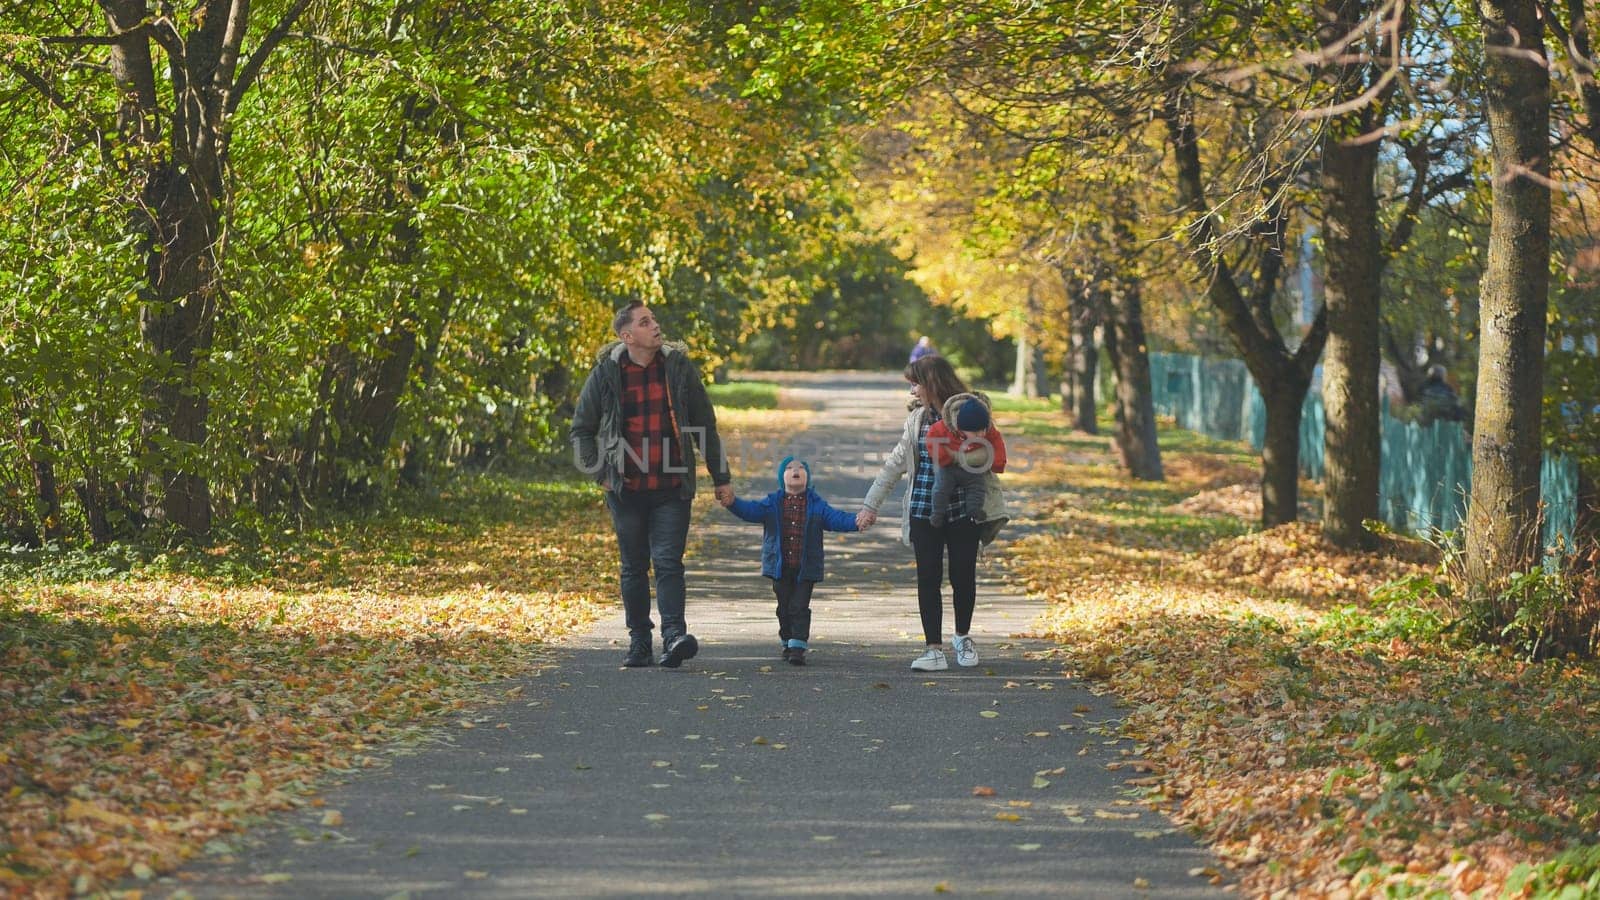 A happy young family walks along a city park road in the fall. by DovidPro